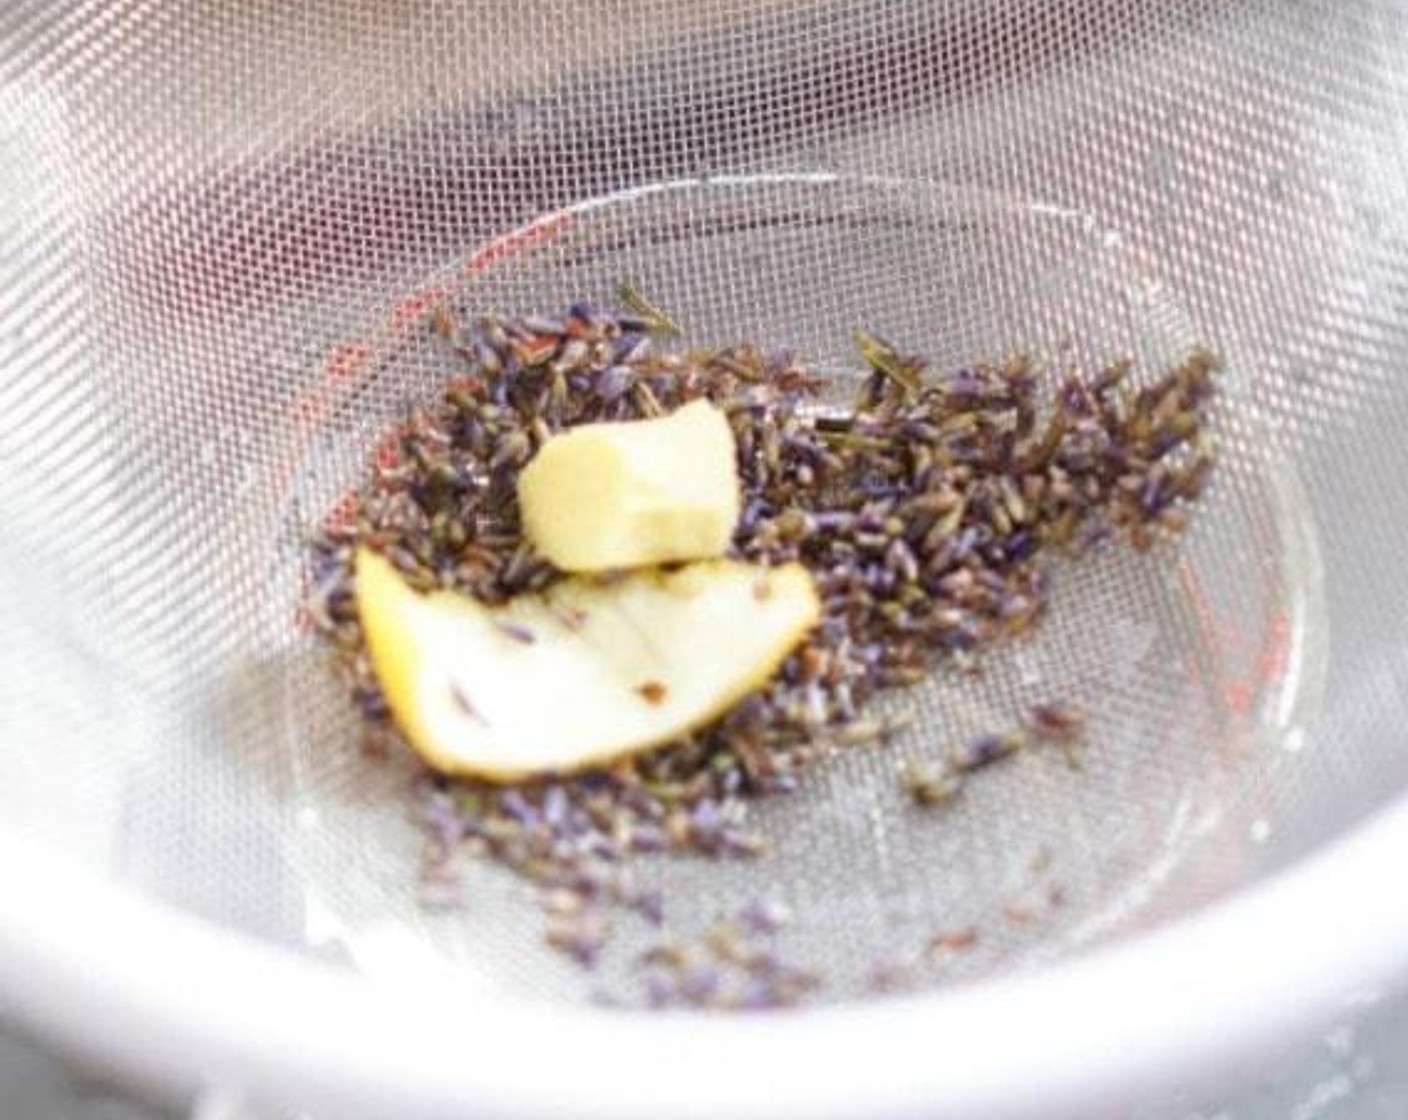 step 3 Add the Lemon Peel, Fresh Ginger (1 in) and Dried Lavender Bulbs (2 Tbsp). Infuse for one hour or overnight in the fridge. Strain, discarding the solids.